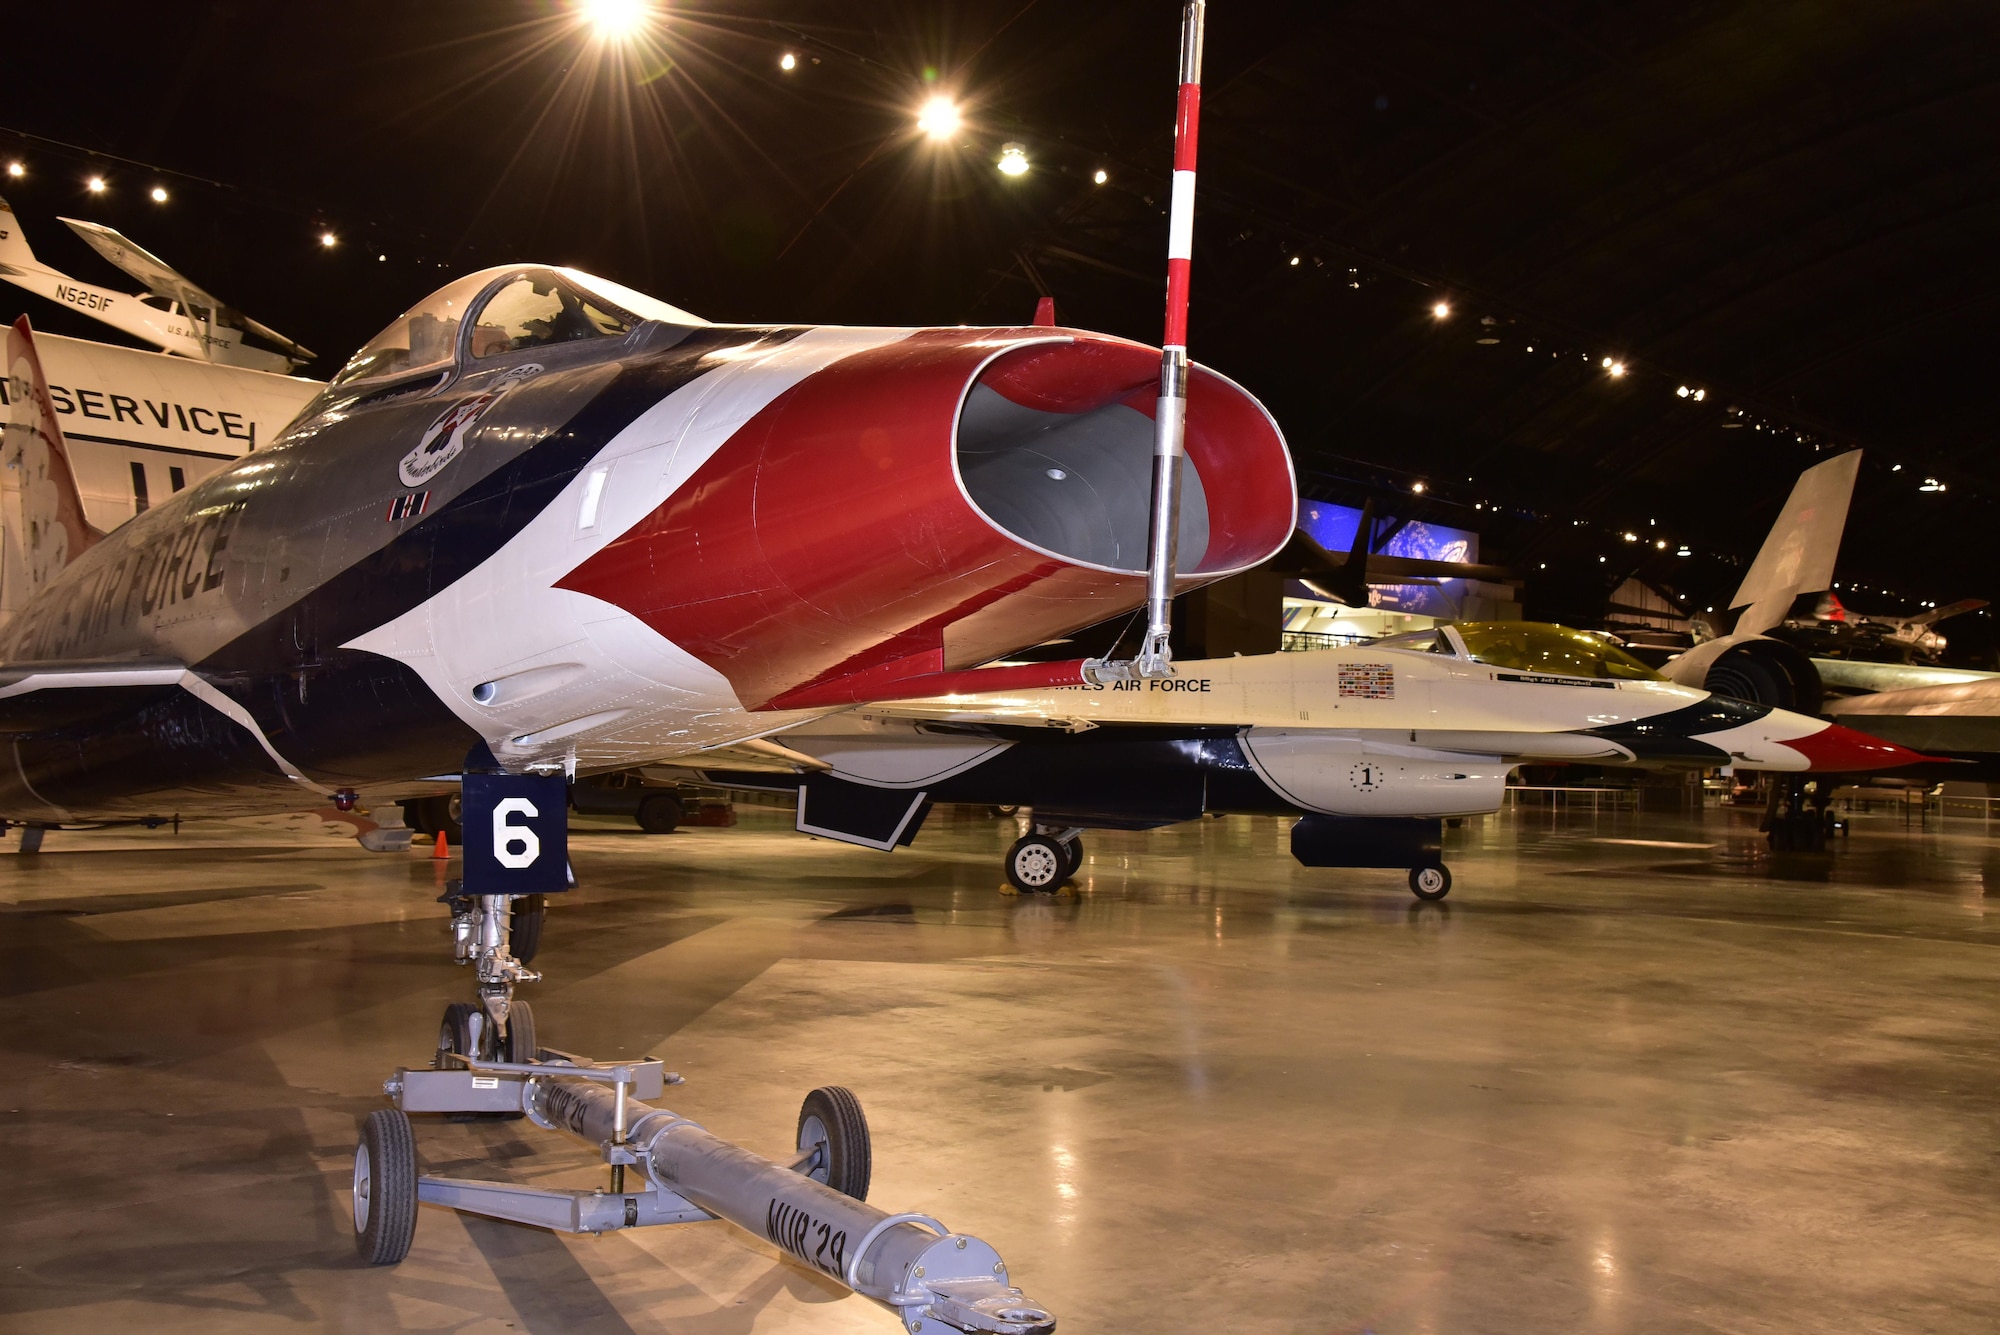 DAYTON, Ohio -- North American F-100D Super Sabre on display in the Cold War Gallery at the National Museum of the United States Air Force. (U.S. Air Force photo by Ken LaRock)